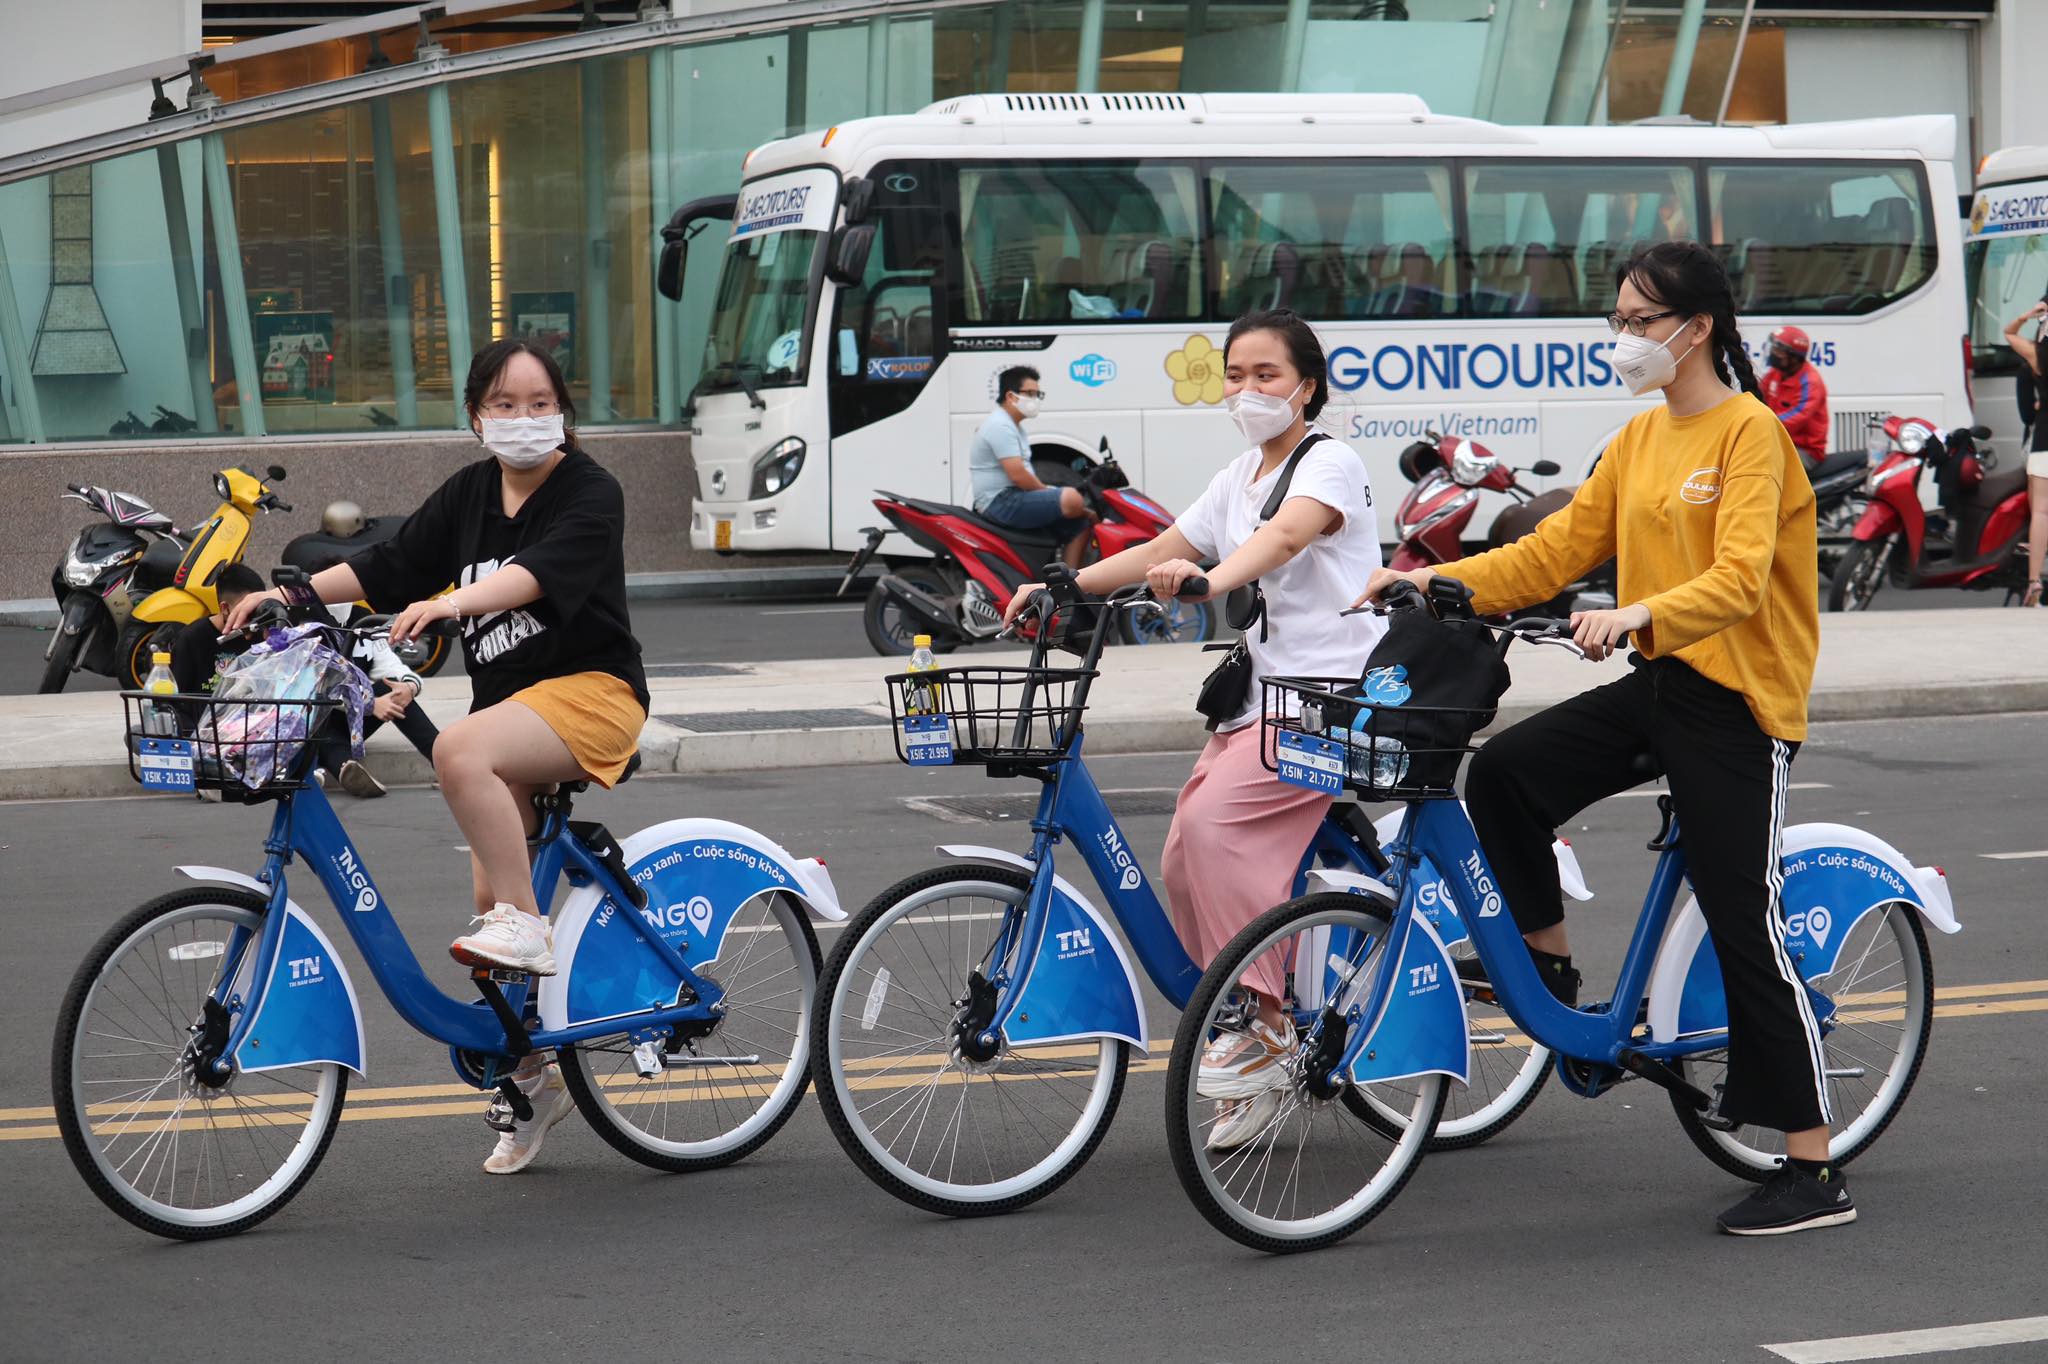 Is it possible to turn Ho Chi Minh City into a bicycle-friendly city?